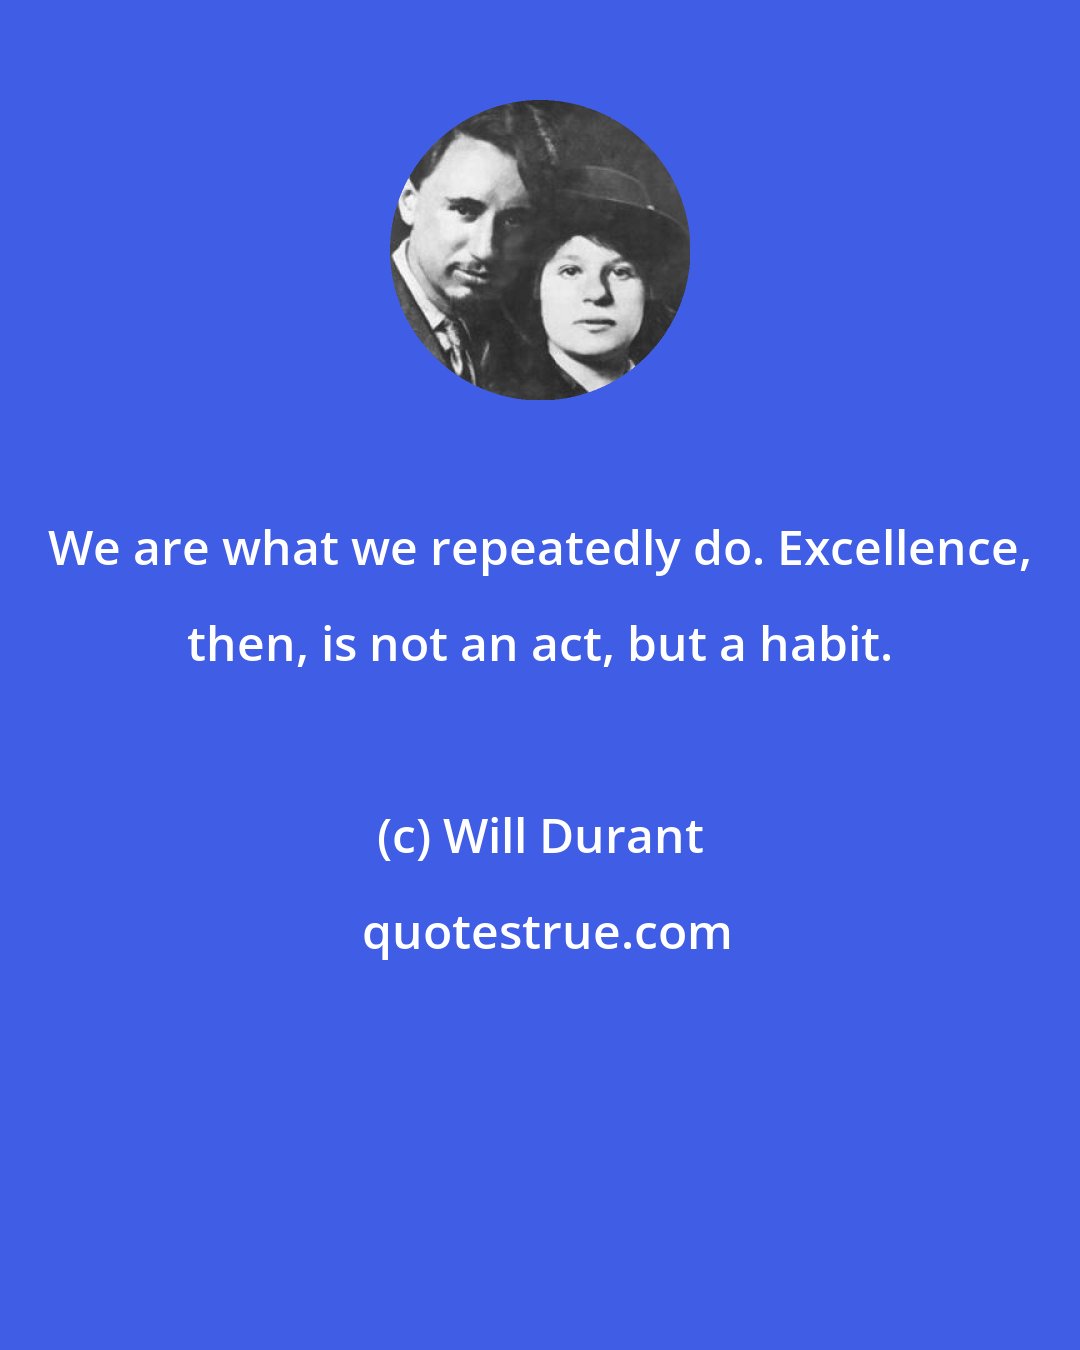 Will Durant: We are what we repeatedly do. Excellence, then, is not an act, but a habit.